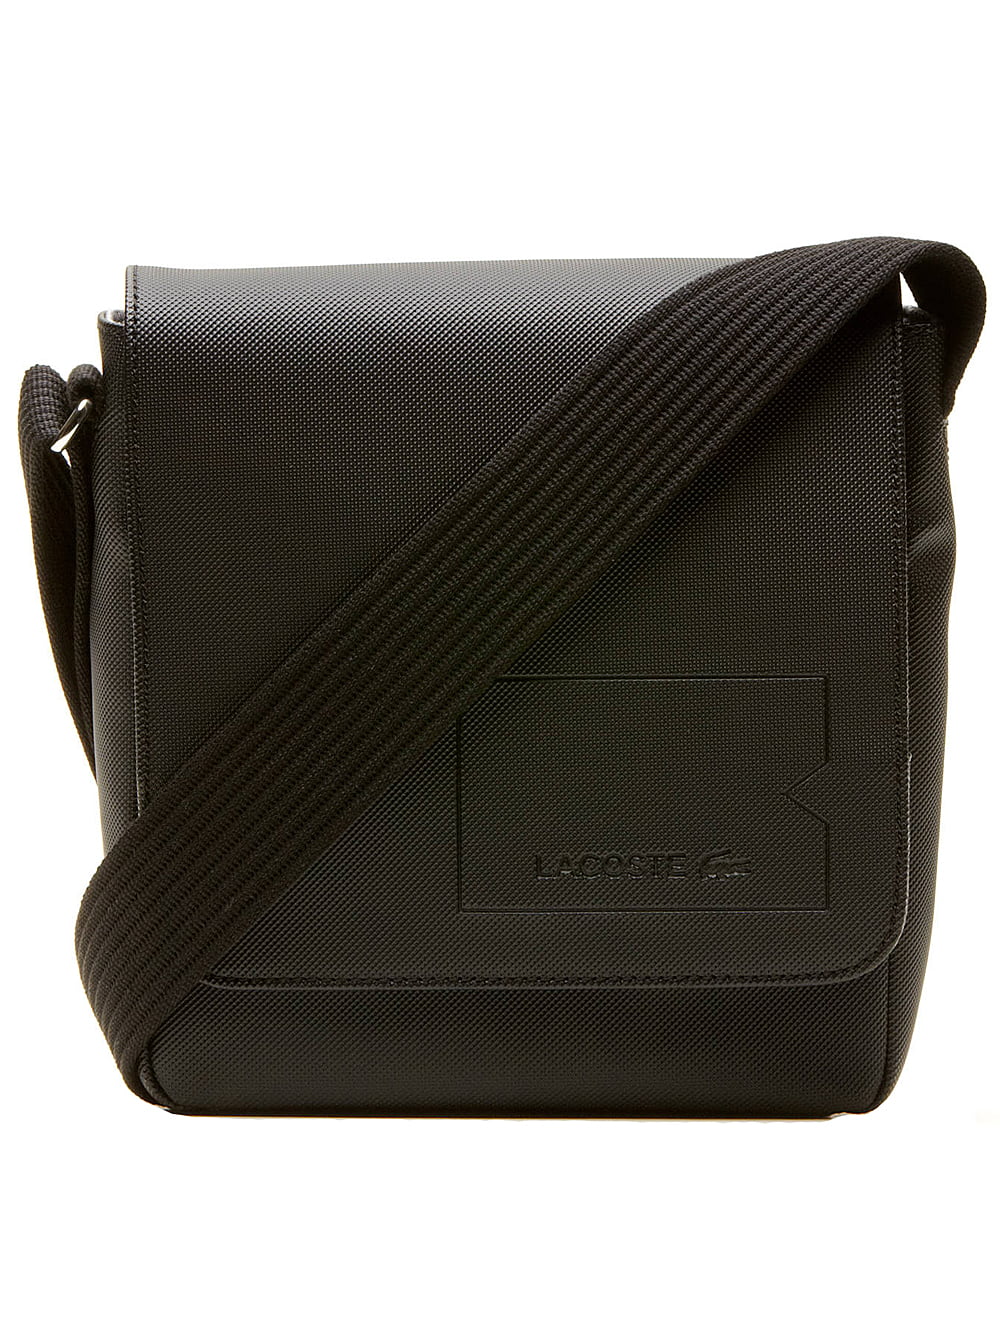 Lacoste Mens Classic Crossover Bag in Black 